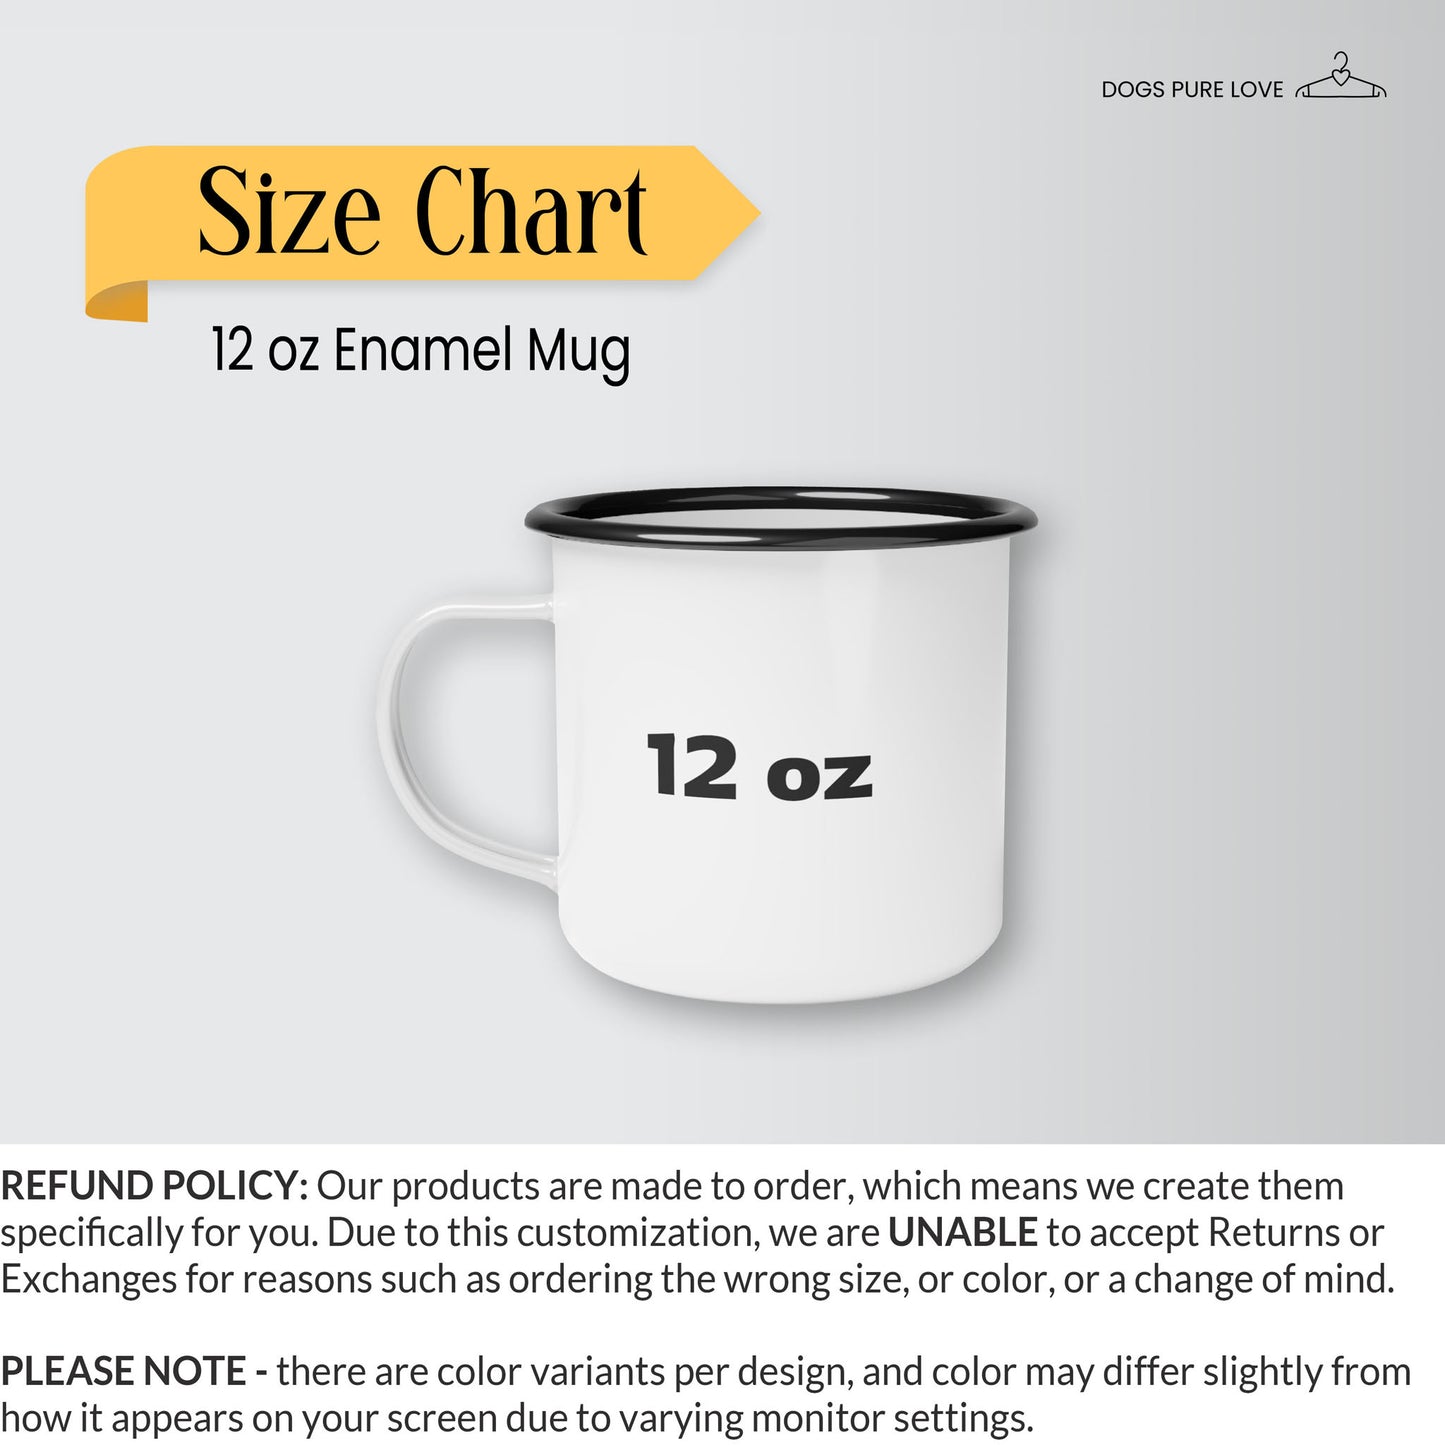 12 oz enamel mug size chart and a brief description of Dogs Pure Love Refund Policy.